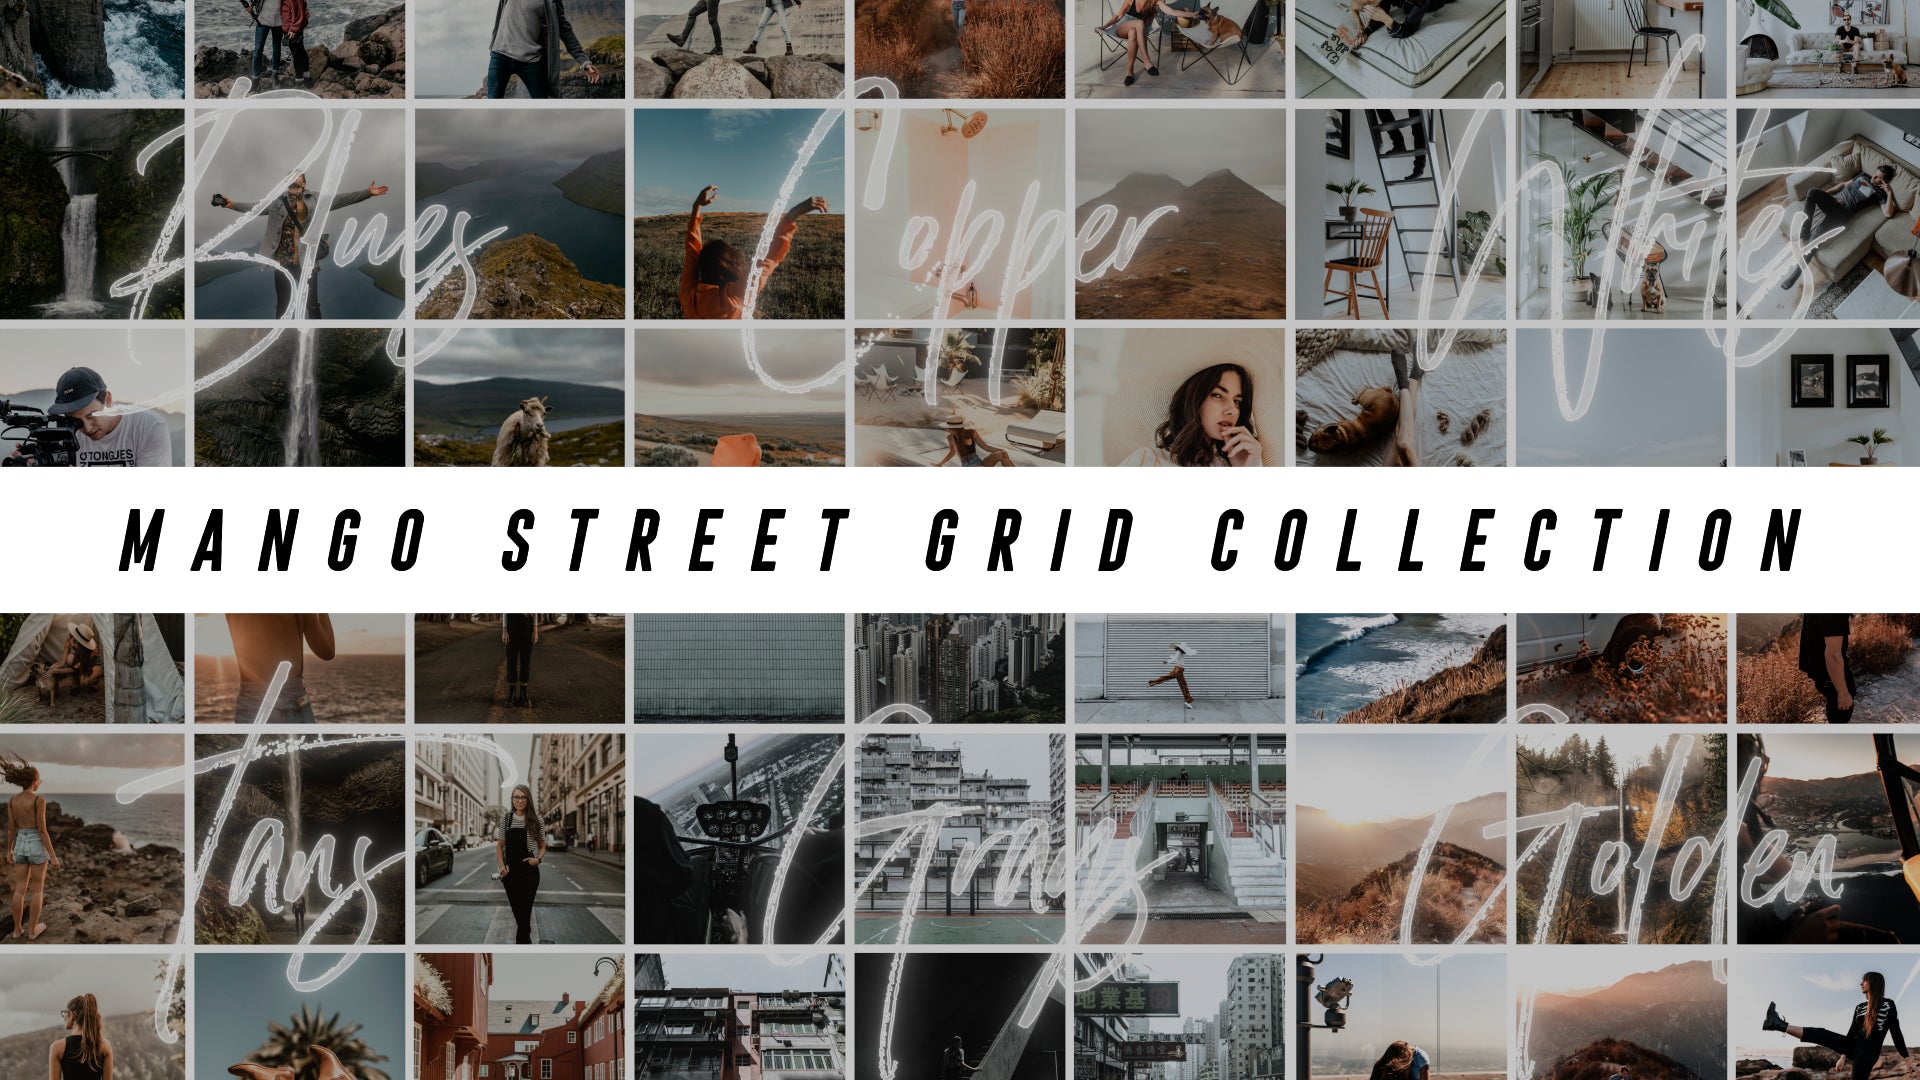 The Grid Collection